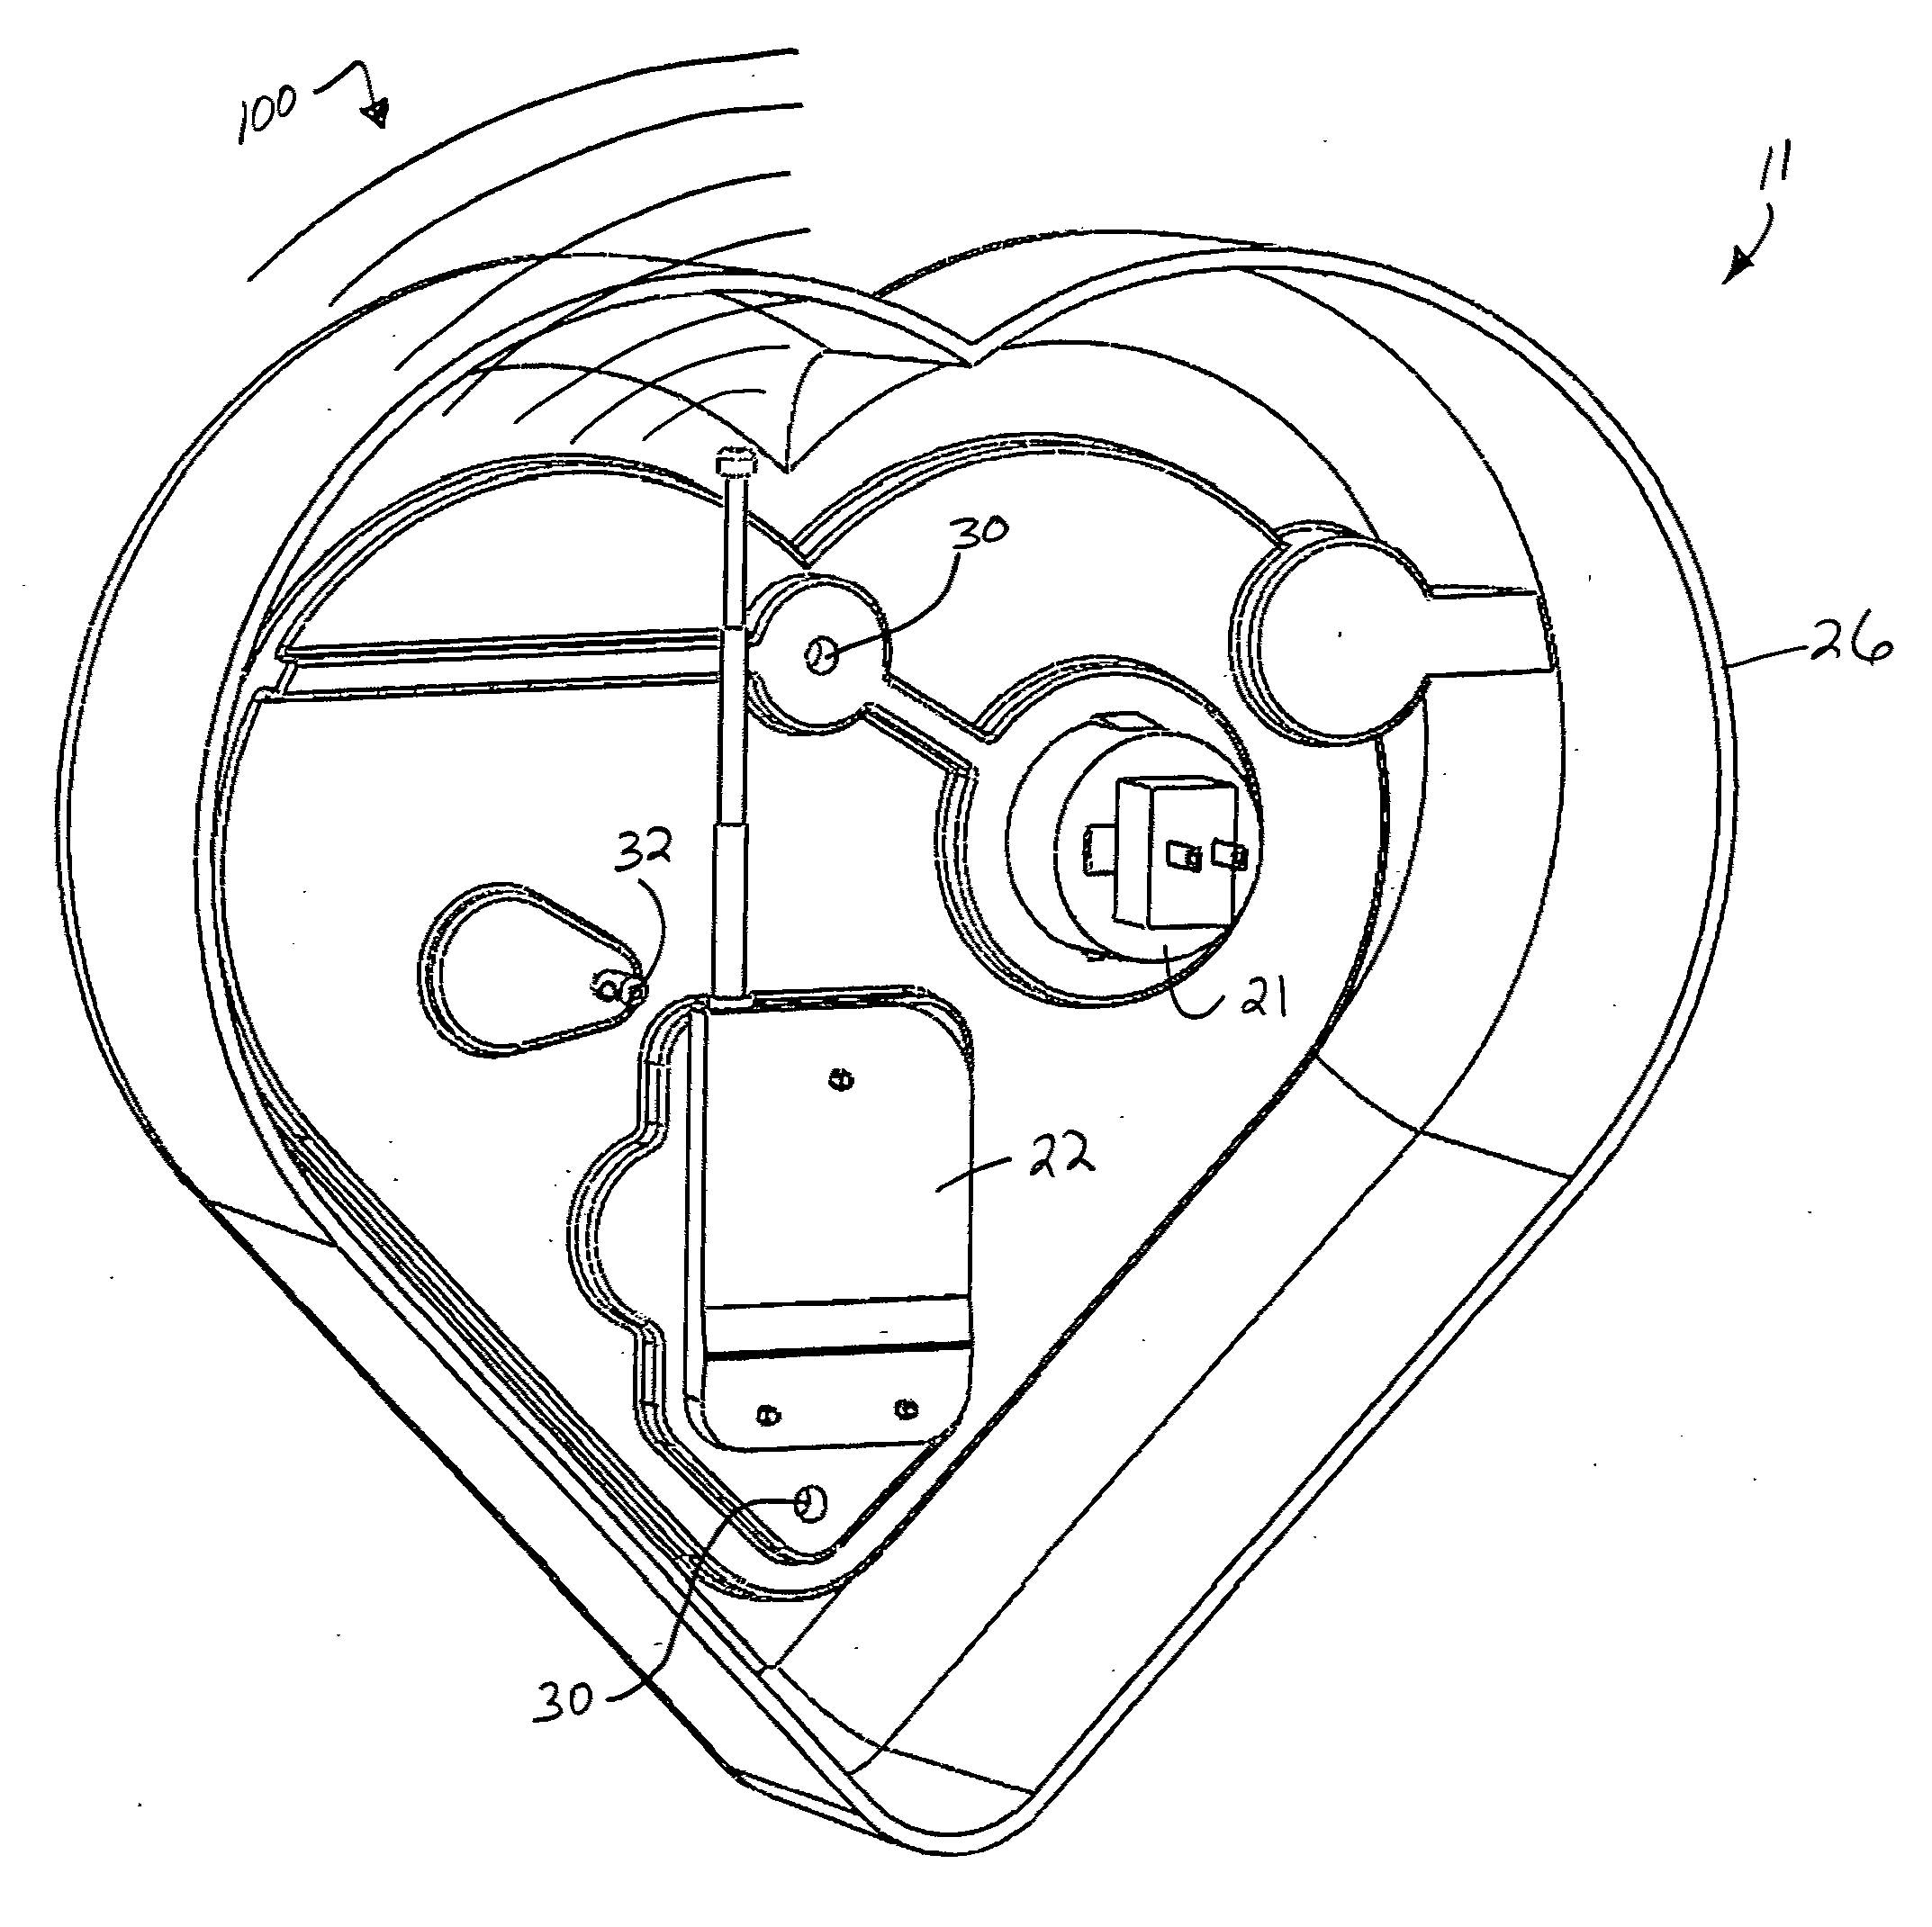 Automated external defibrillator locating system and method